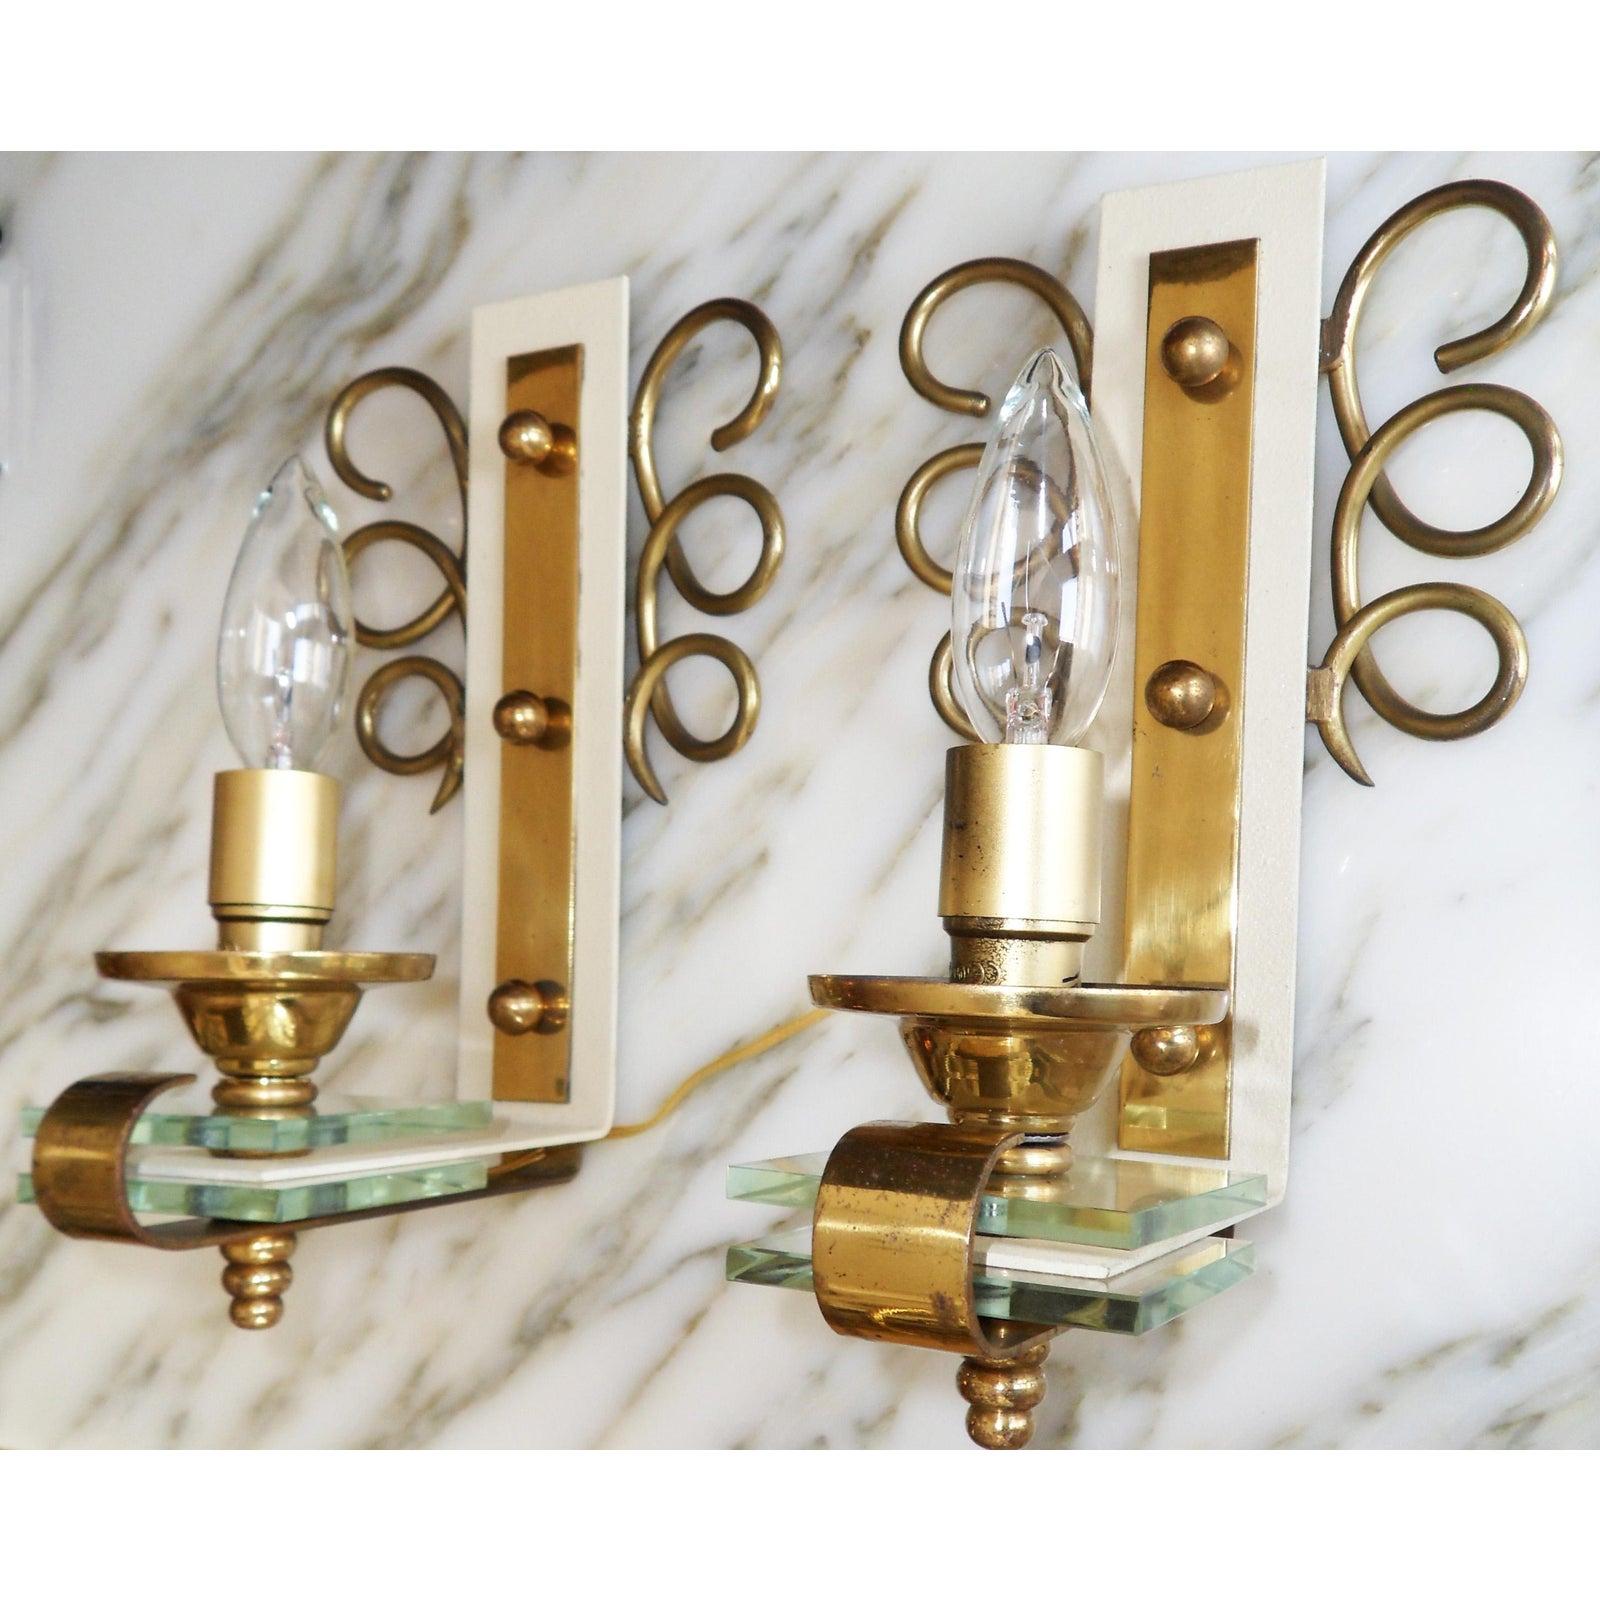 French Art Deco circa 1950 original pair of Jules Leleu  style sconces, brass and crystal.
Wired for US and in working condition each sconce takes one bulb max. 40 watts.
Original aged patina to the brass.
Sold with new black & gold paper